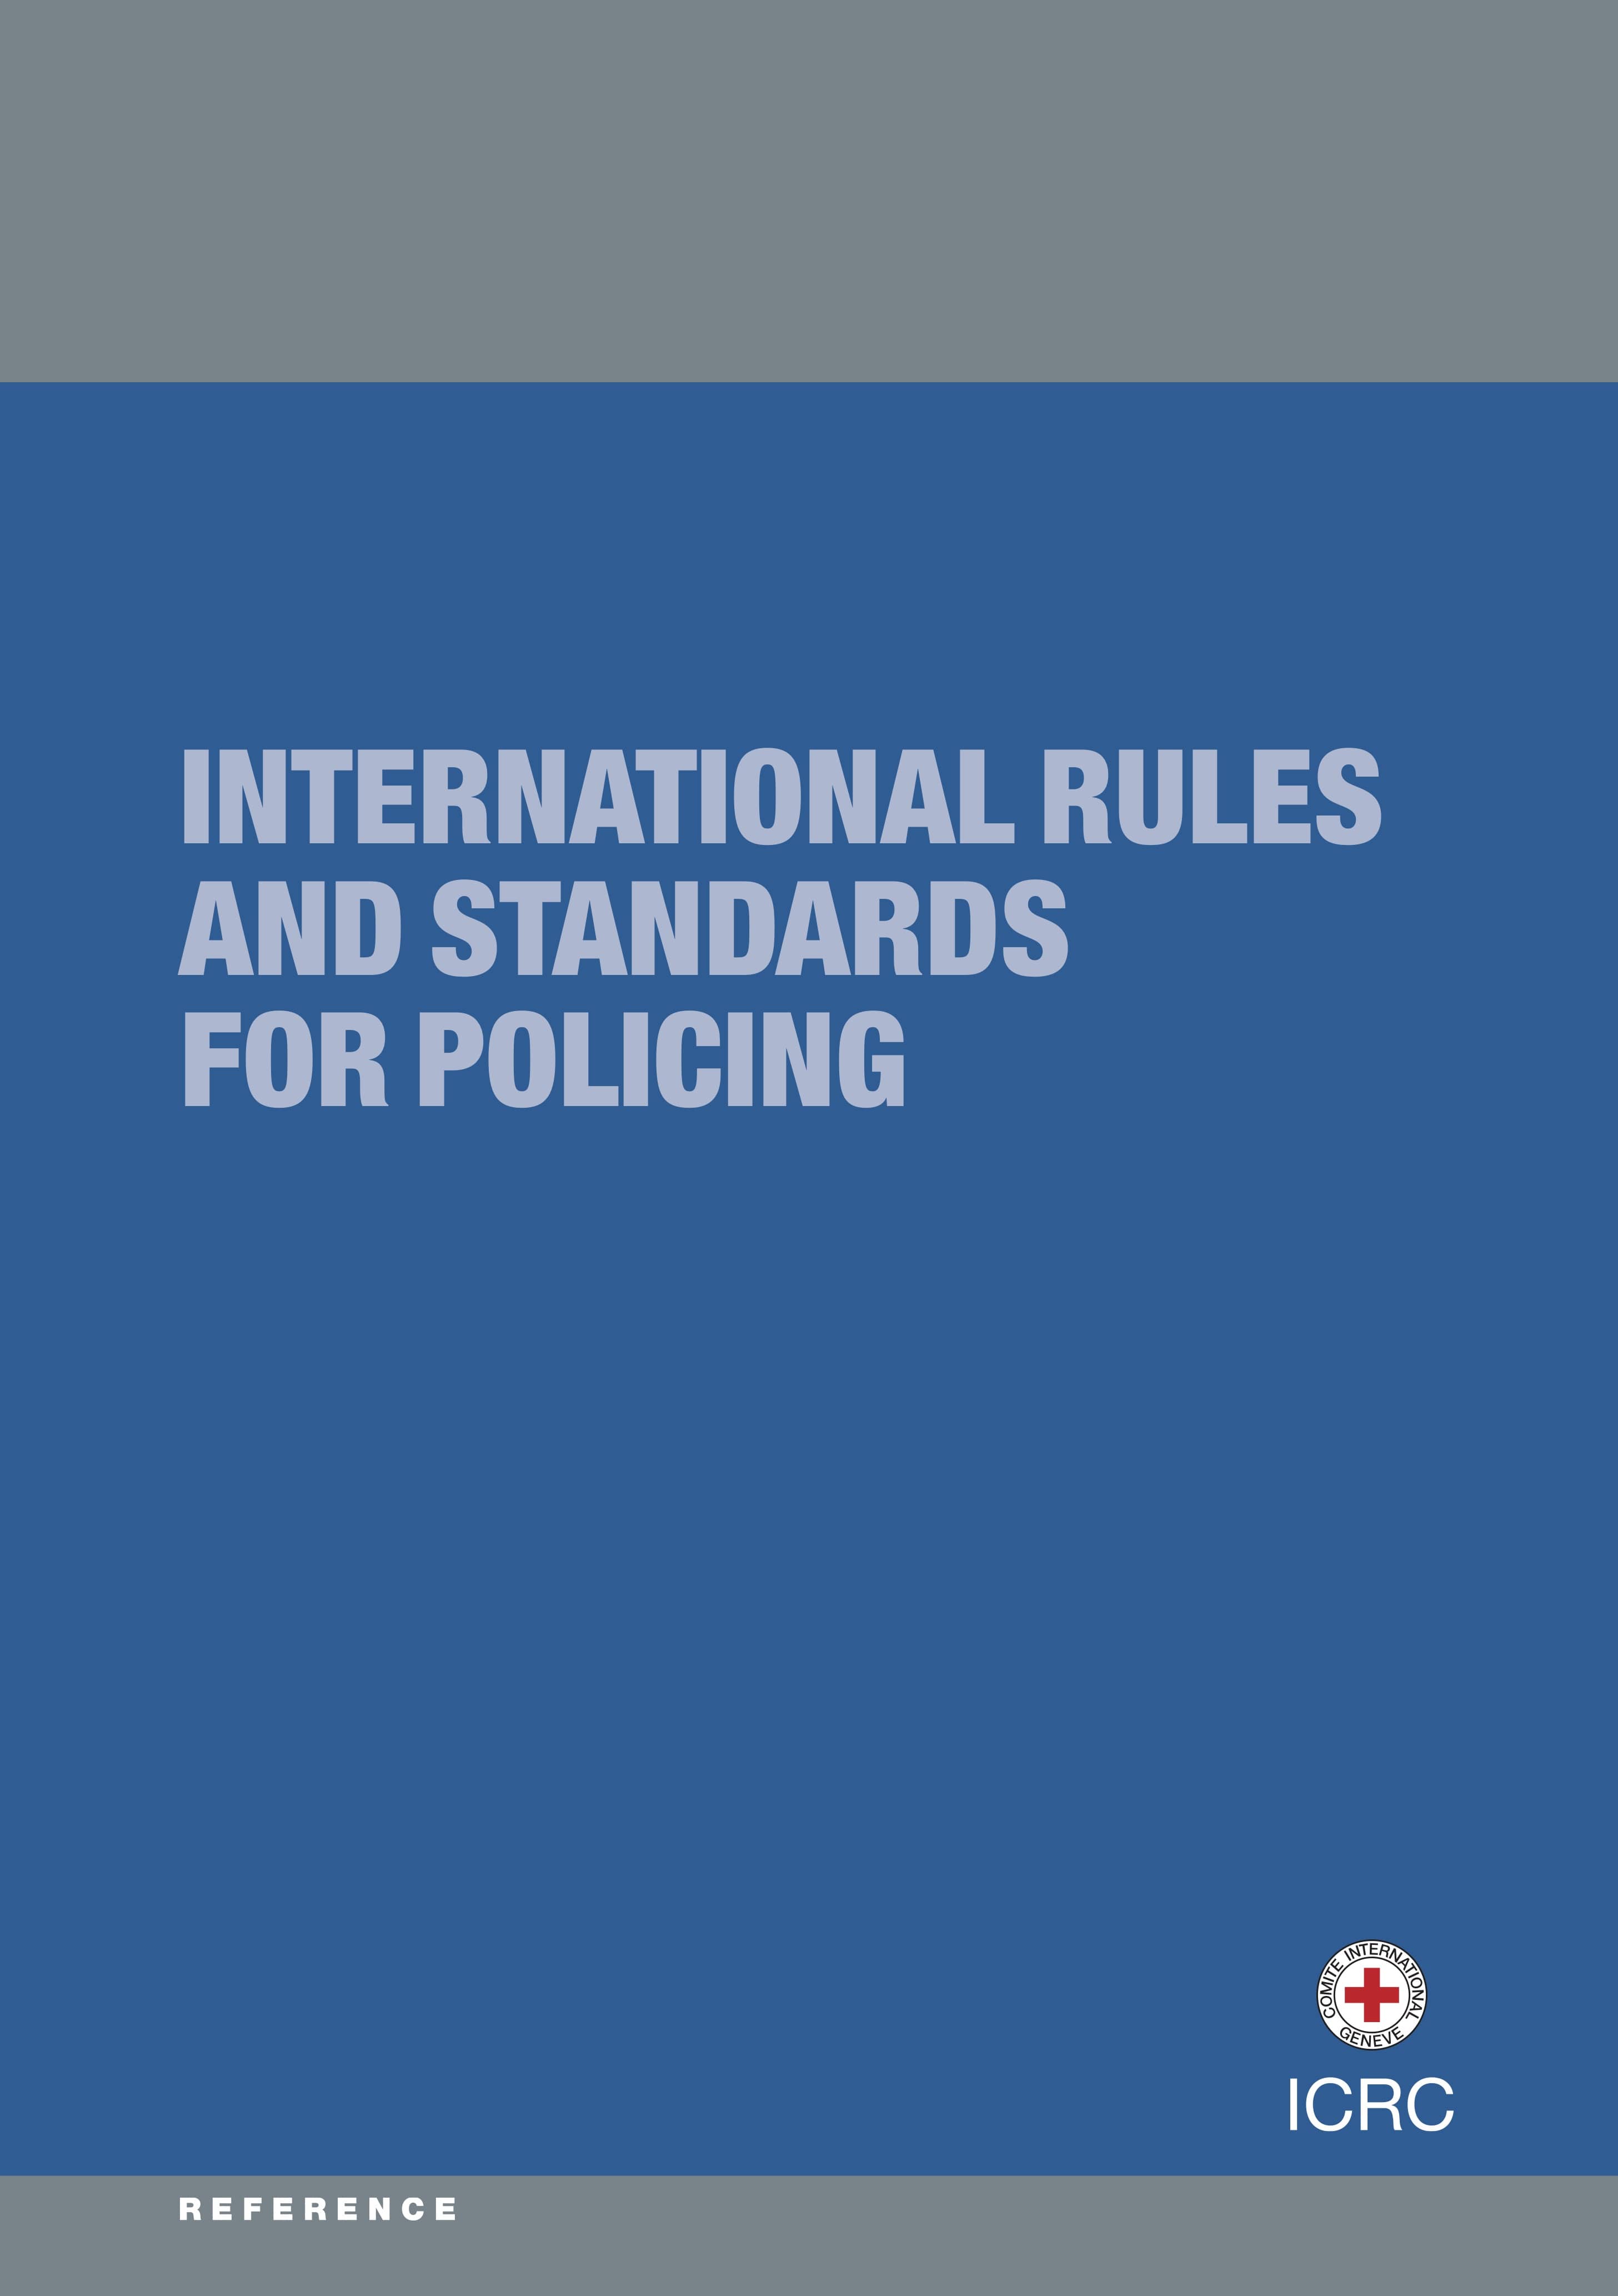 International Rules and Standards for Policing (ICRC, 2014)